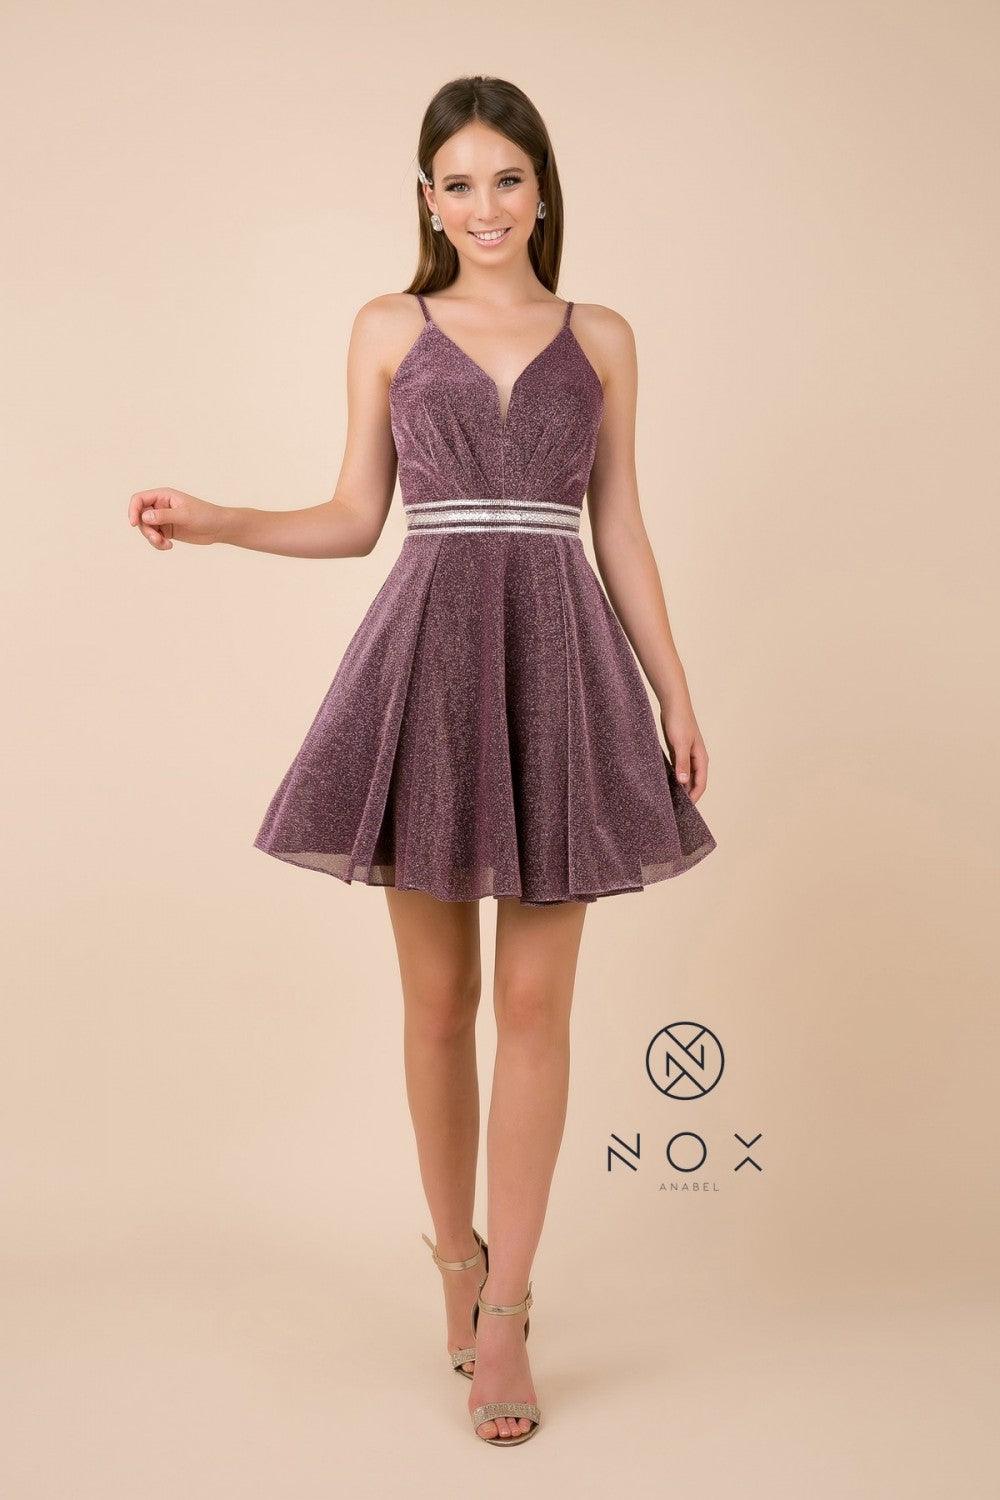 Short Dress Homecoming Spaghetti Straps Prom - The Dress Outlet Nox Anabel